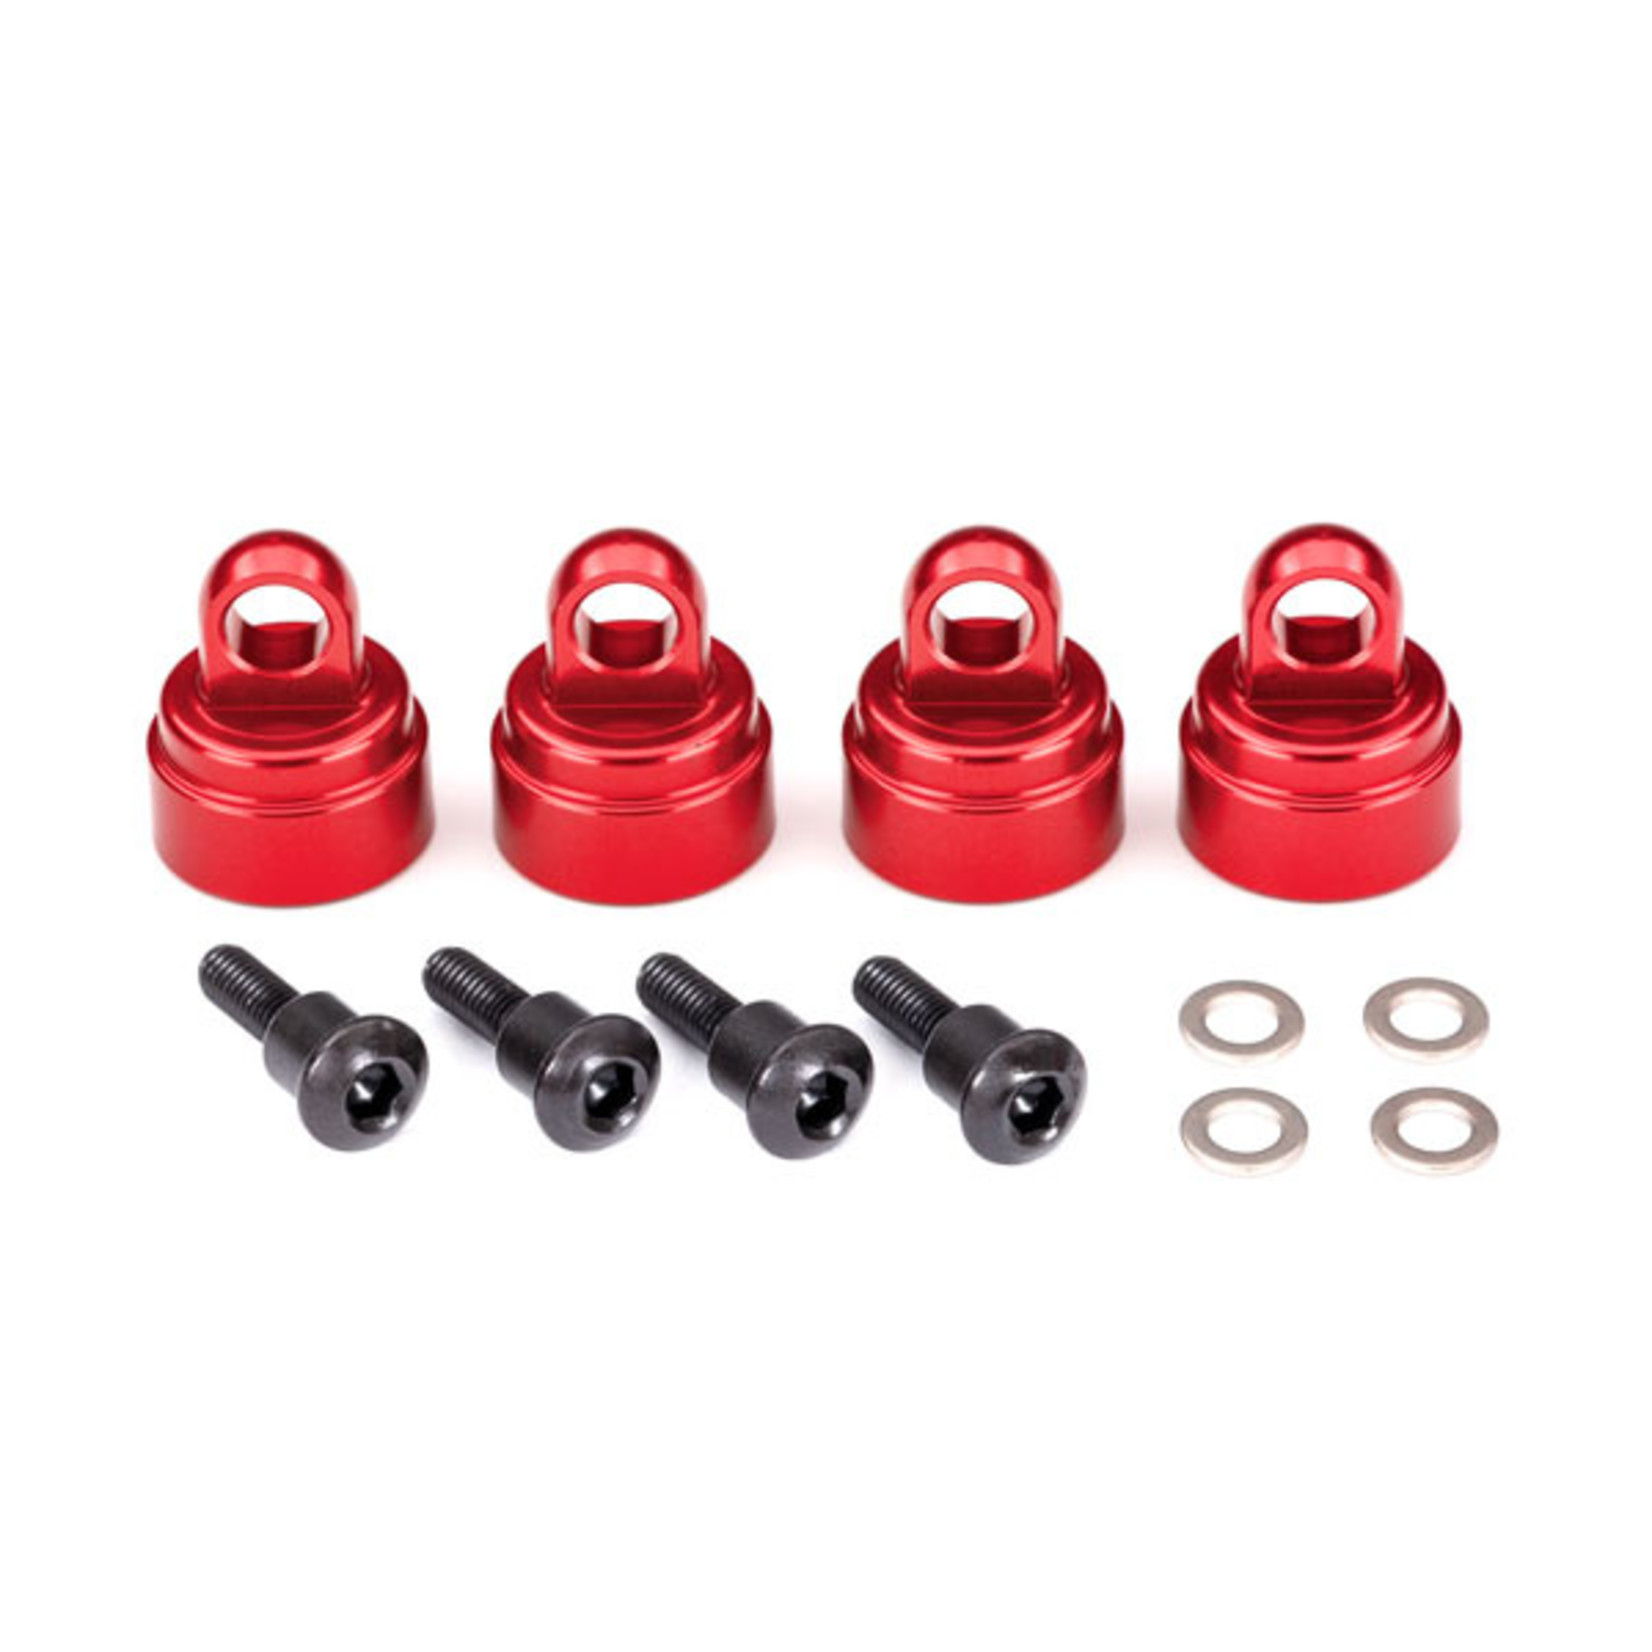 Traxxas 3767X - Shock caps, aluminum (red-anodized) (4) (f